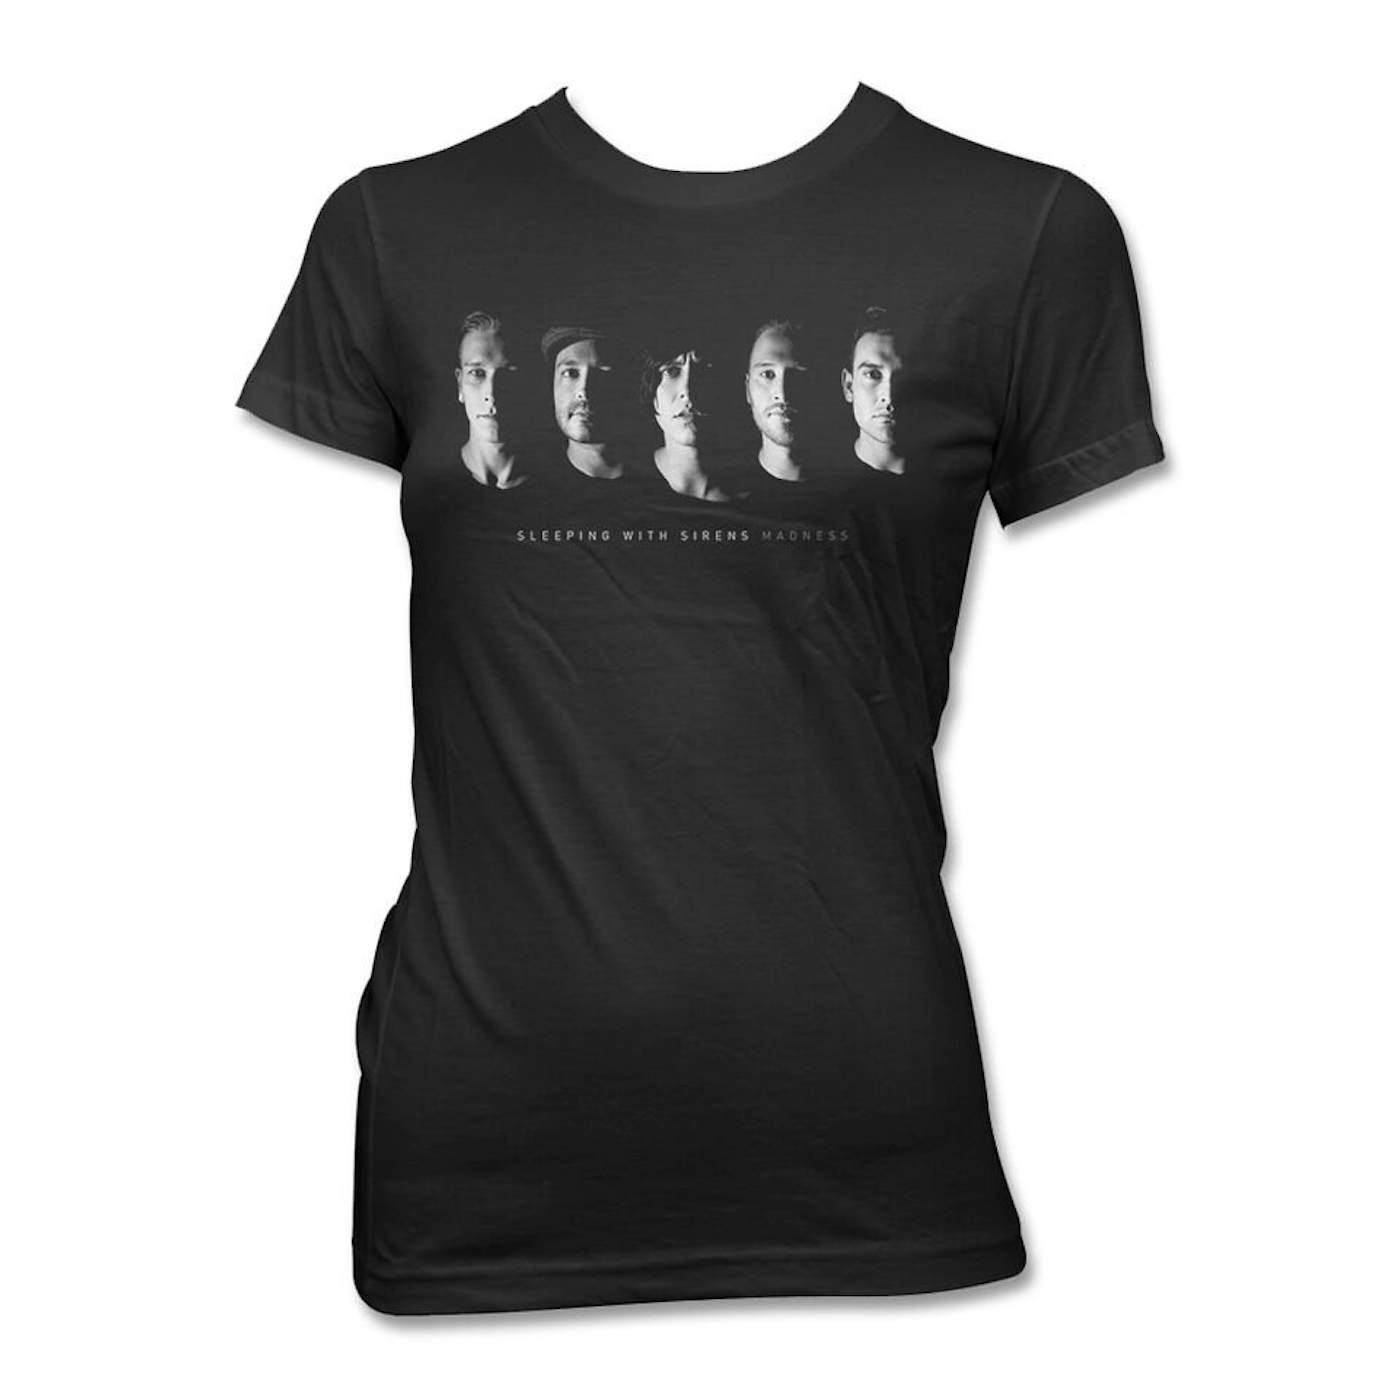 Sleeping With Sirens Madness Album Cover T-Shirt - Women's